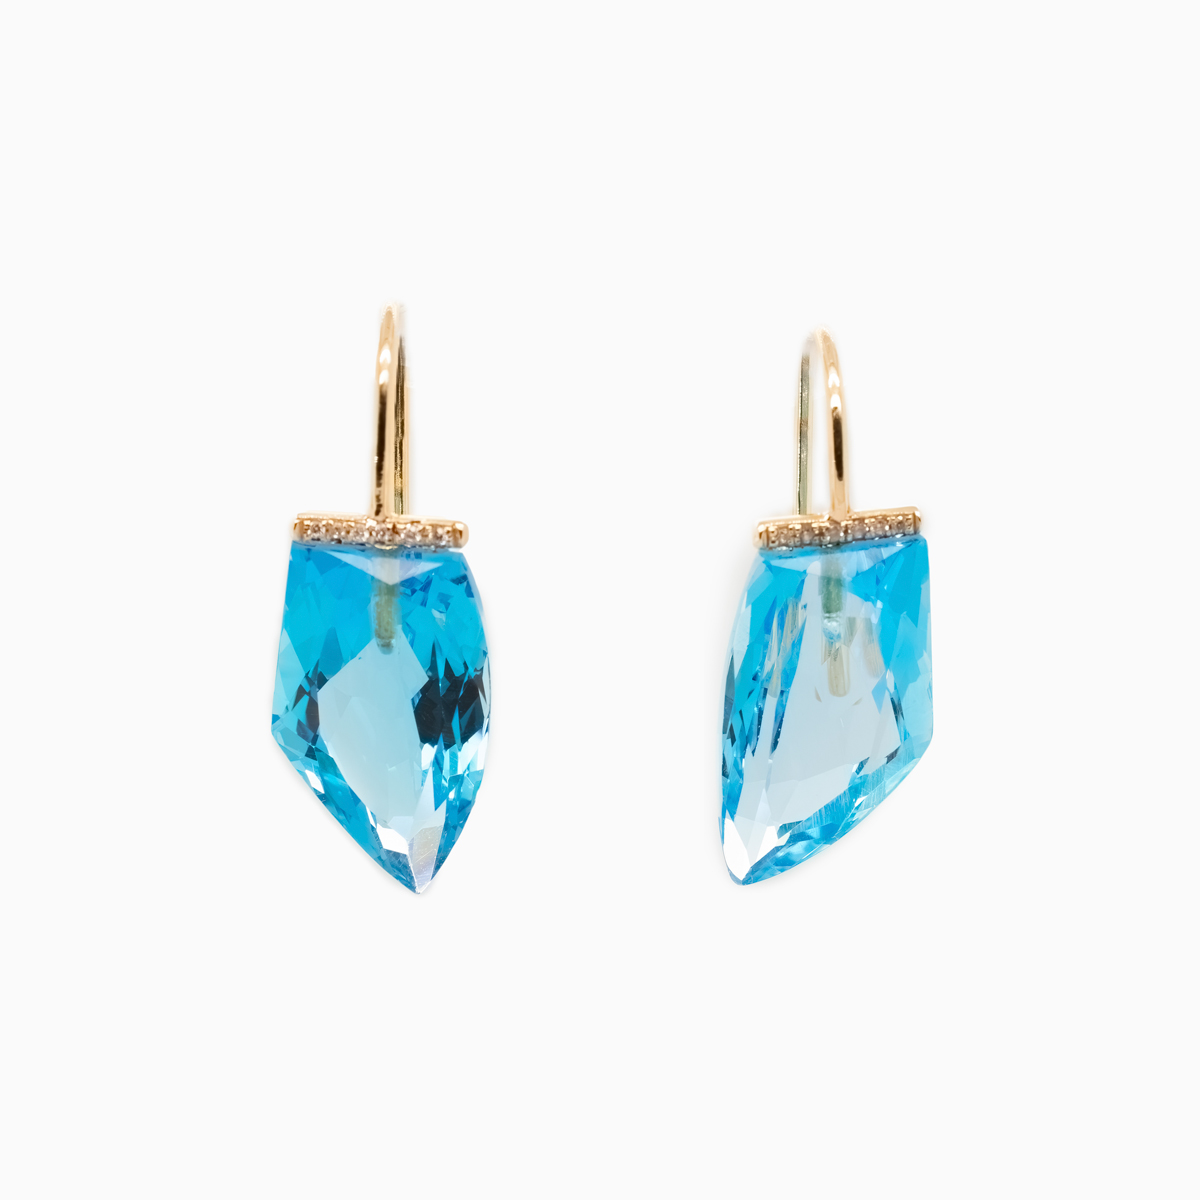 Dimond accented Natural Blue Topaz Drop Earrings, 18k Yellow Gold